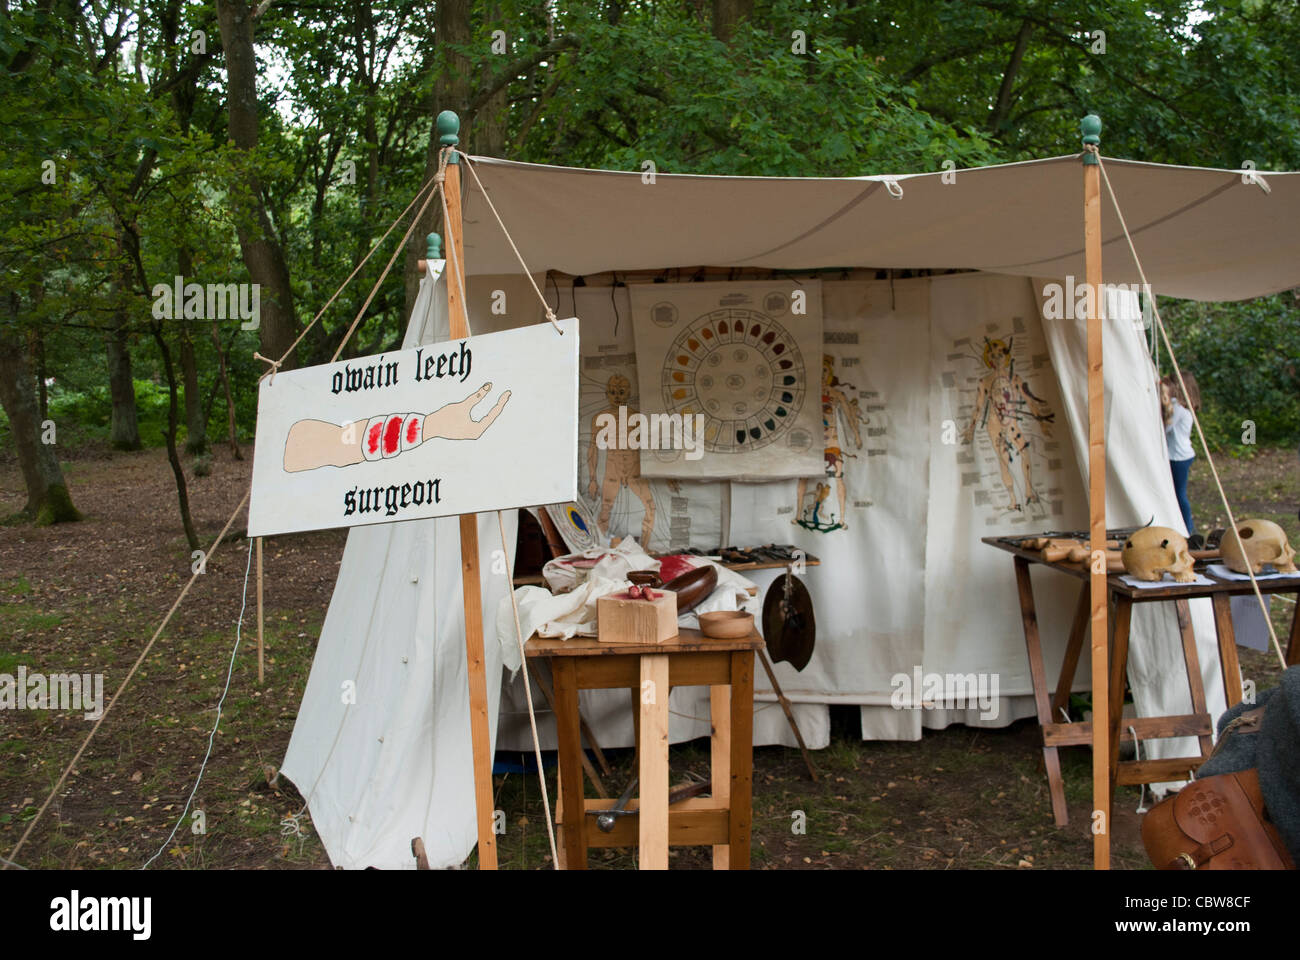 Tent of Owain Leech surgeon, used for demonstration of old medical practices at Robin Hood festival Stock Photo